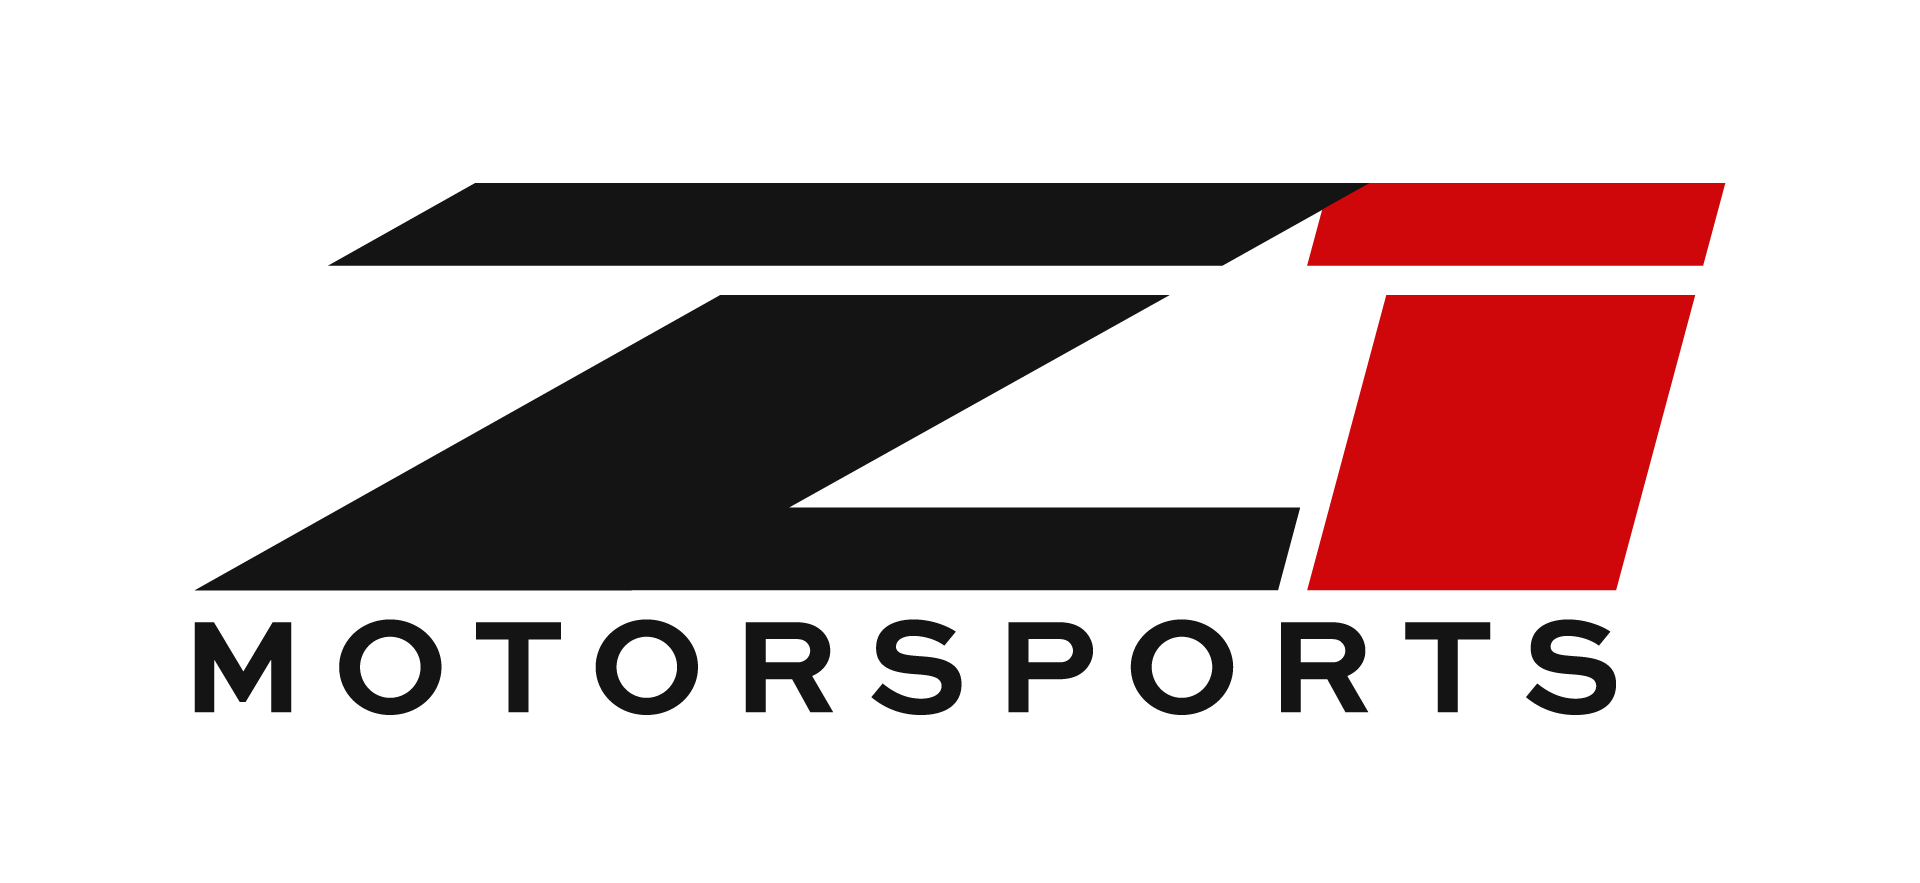 Z1Motorsports.com - Nissan 300zx, 350Z, 370Z, Infiniti G35, GTR, and G37 Parts and Performance Experts